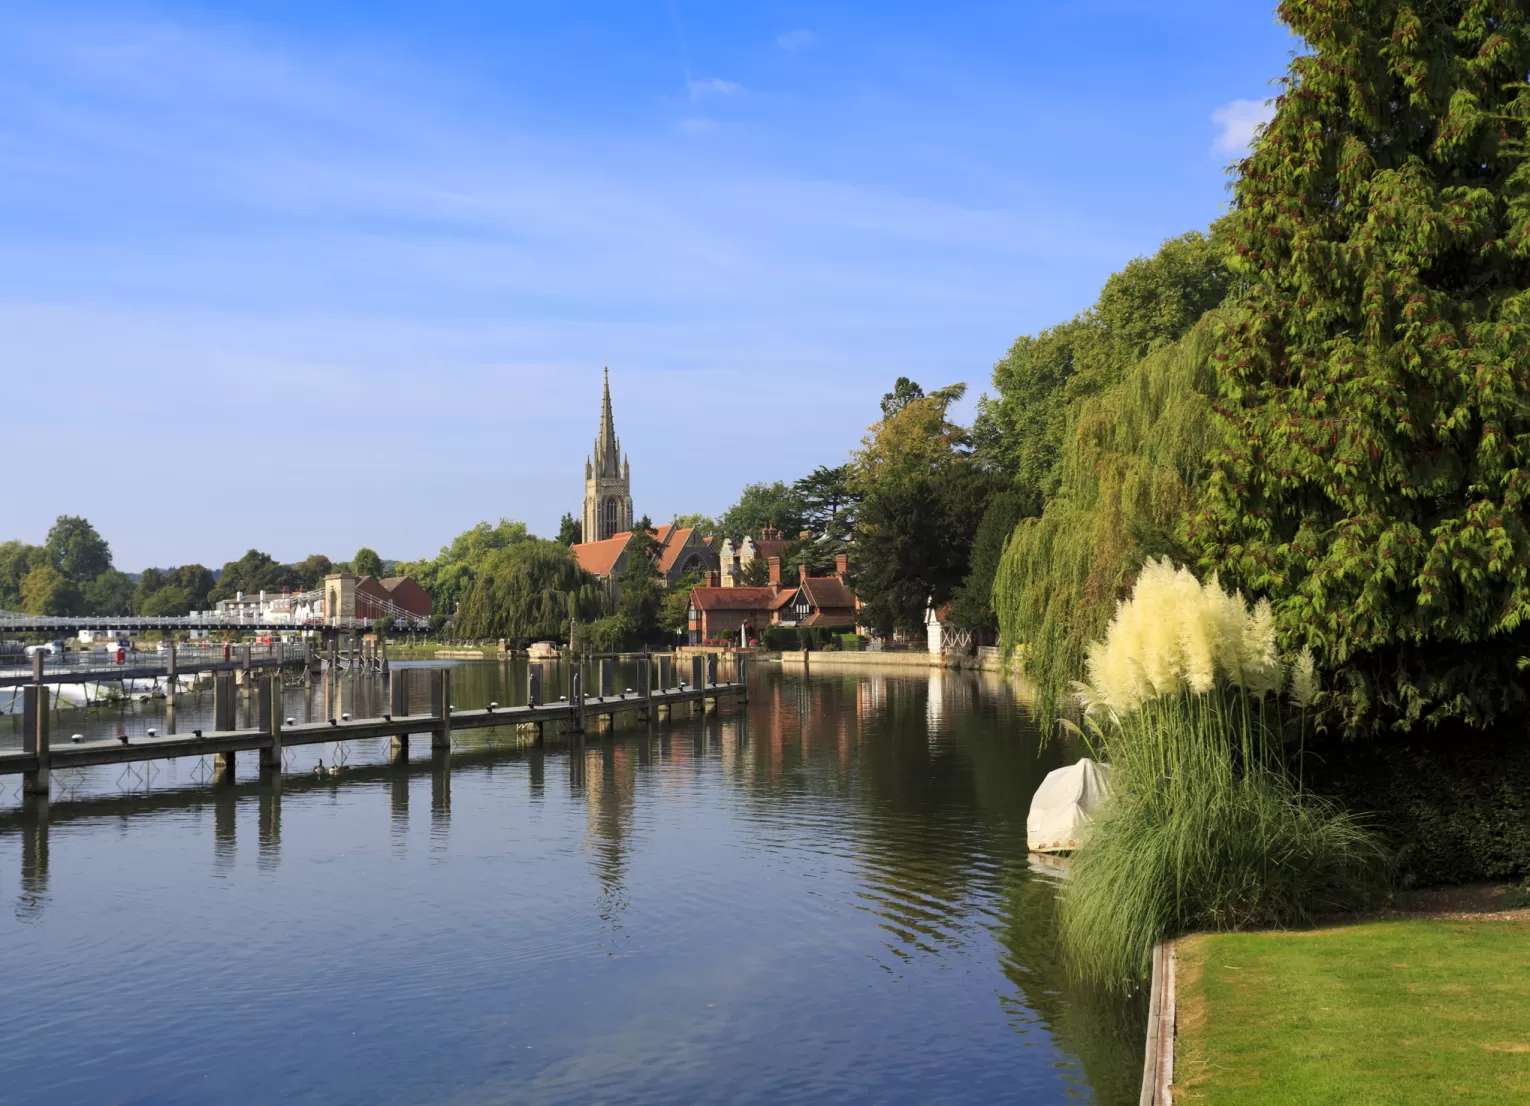 The church and weir at Marlow